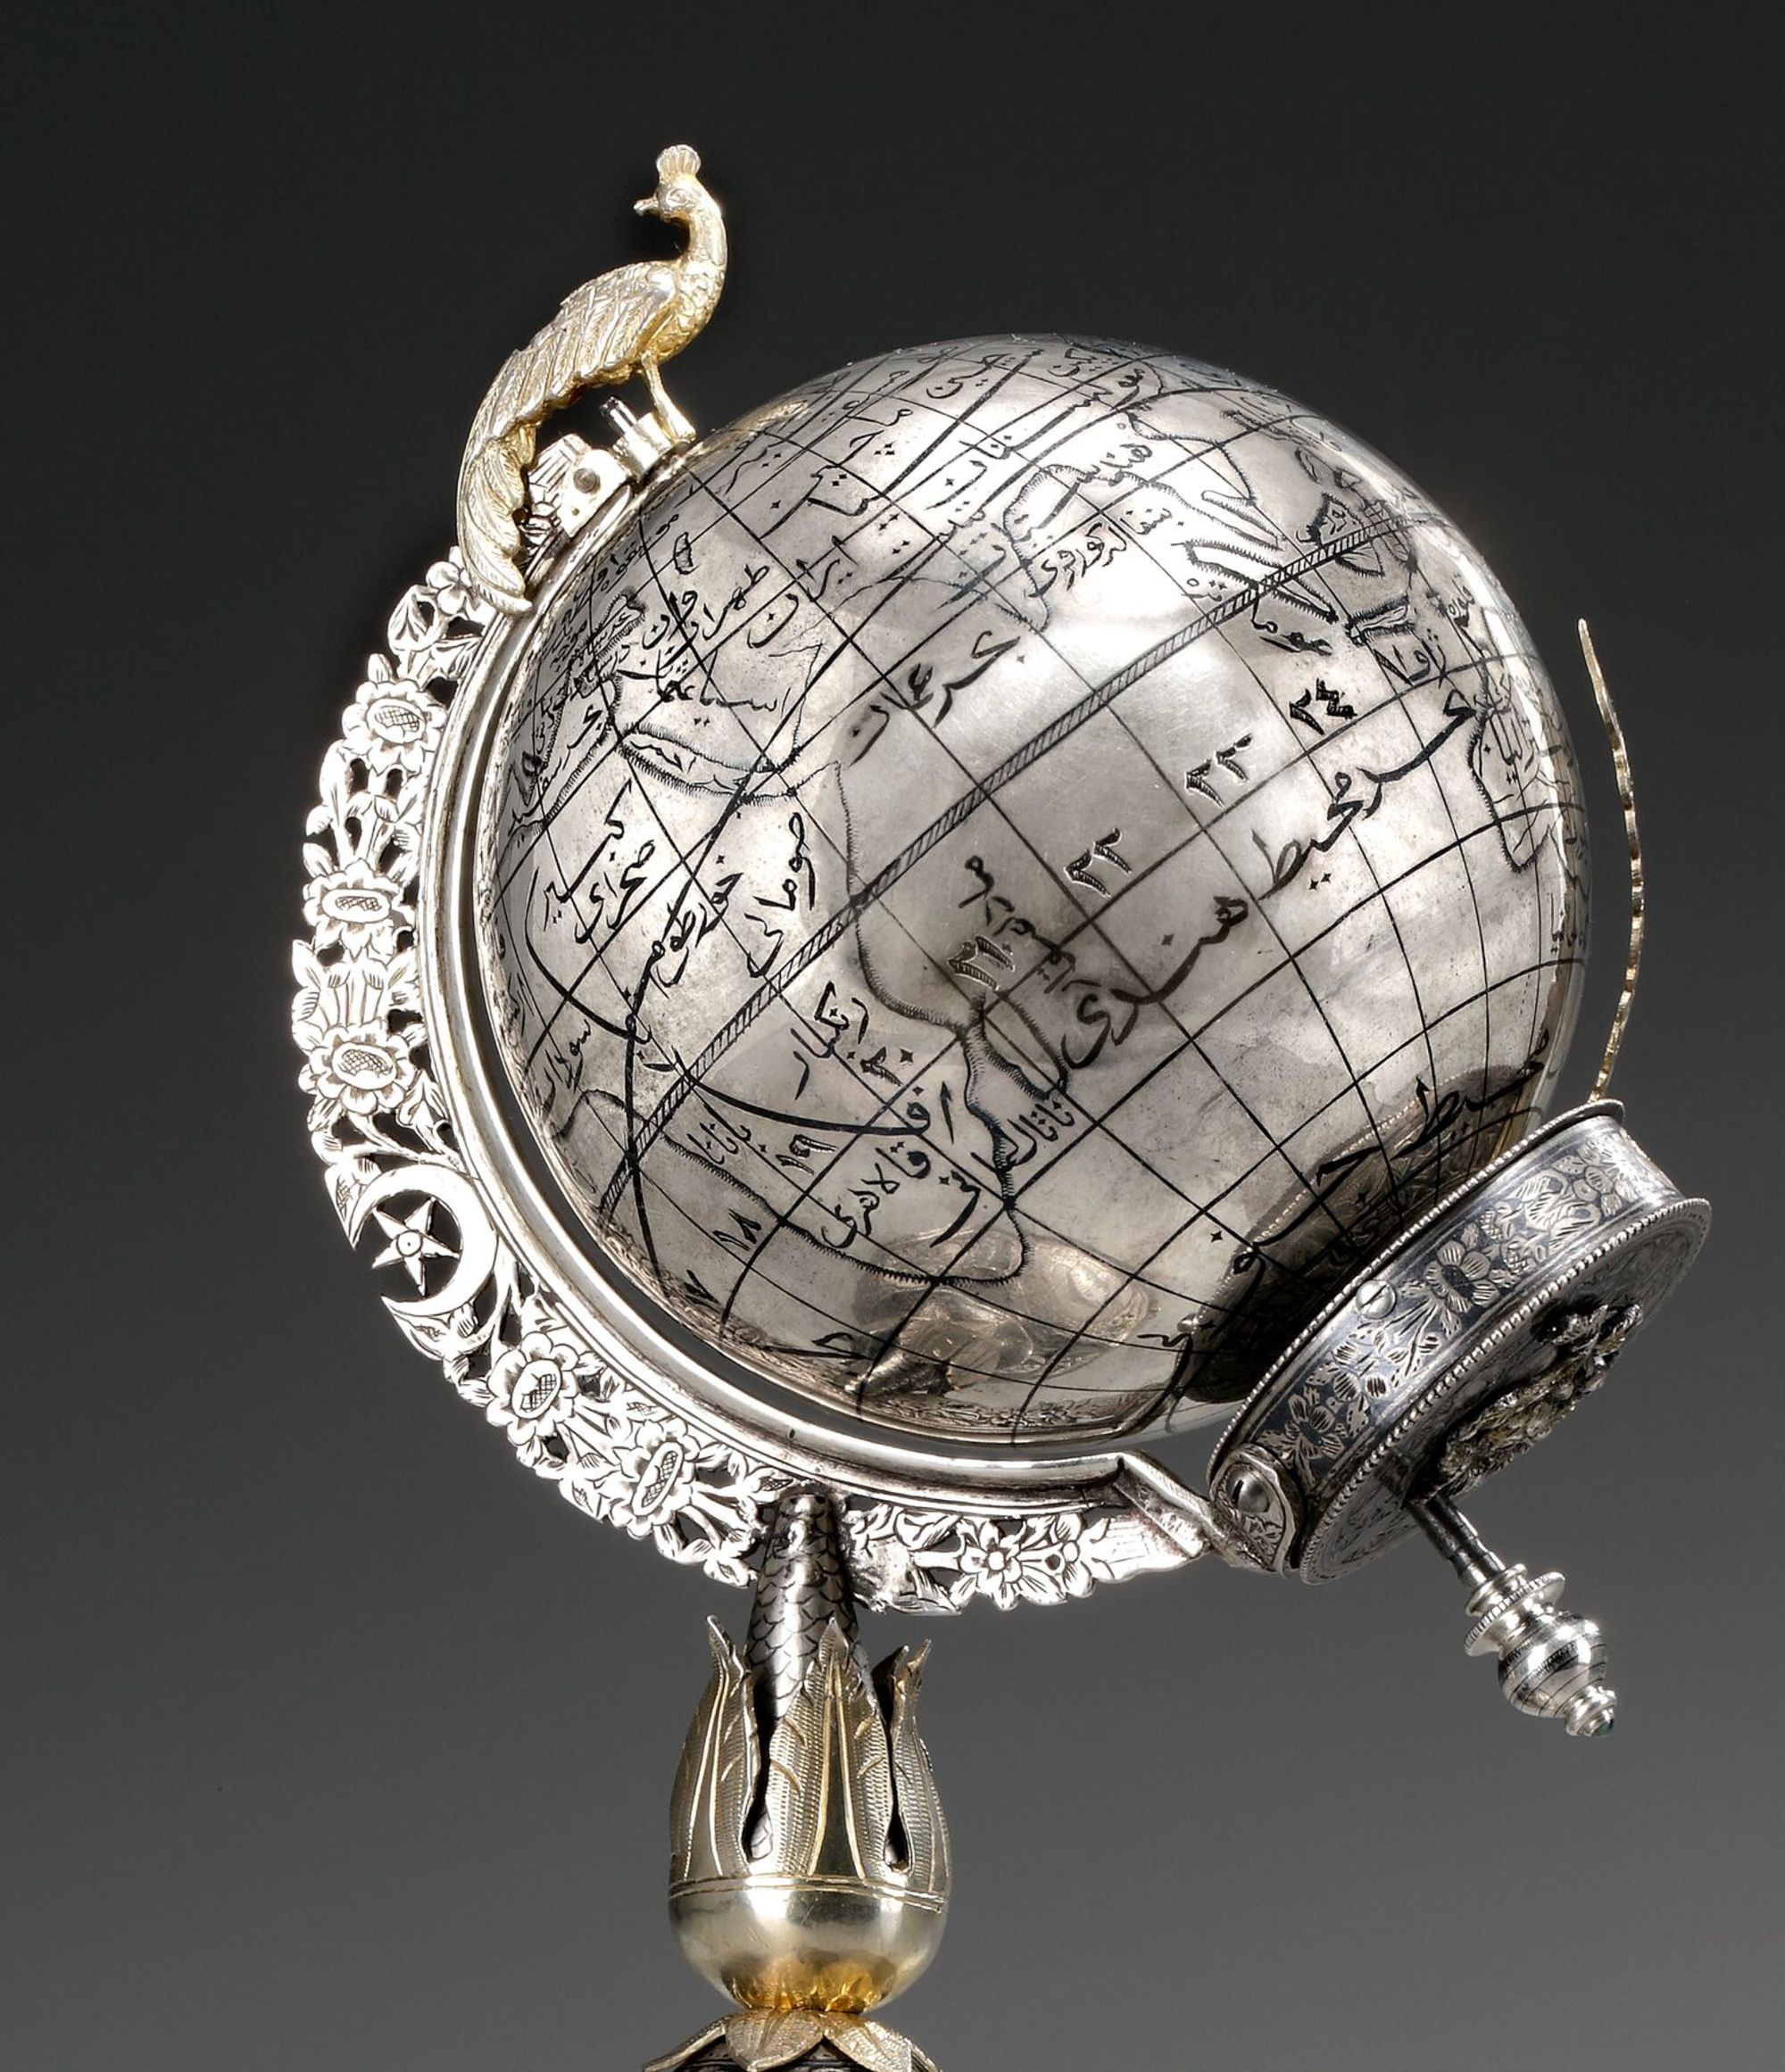 AN OTTOMAN SILVER, NIELLOED AND ENGRAVED GLOBE CLOCK BEARING THE TUGHRA OF SULTAN ABDULHAMID II TURK - Image 9 of 18